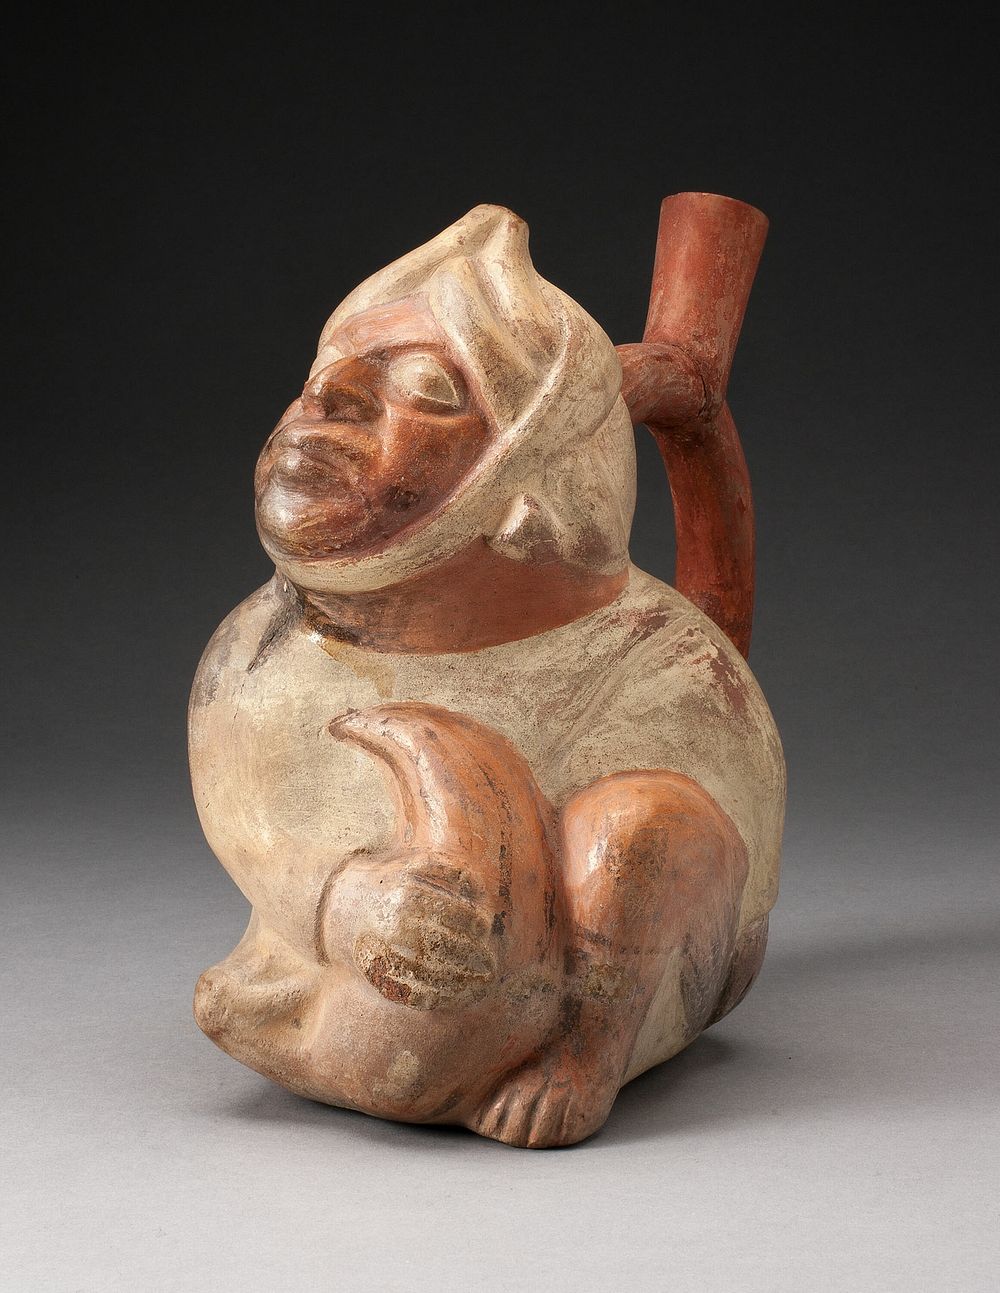 Handle Spout Vessel in the Form of a Seated Man by Moche